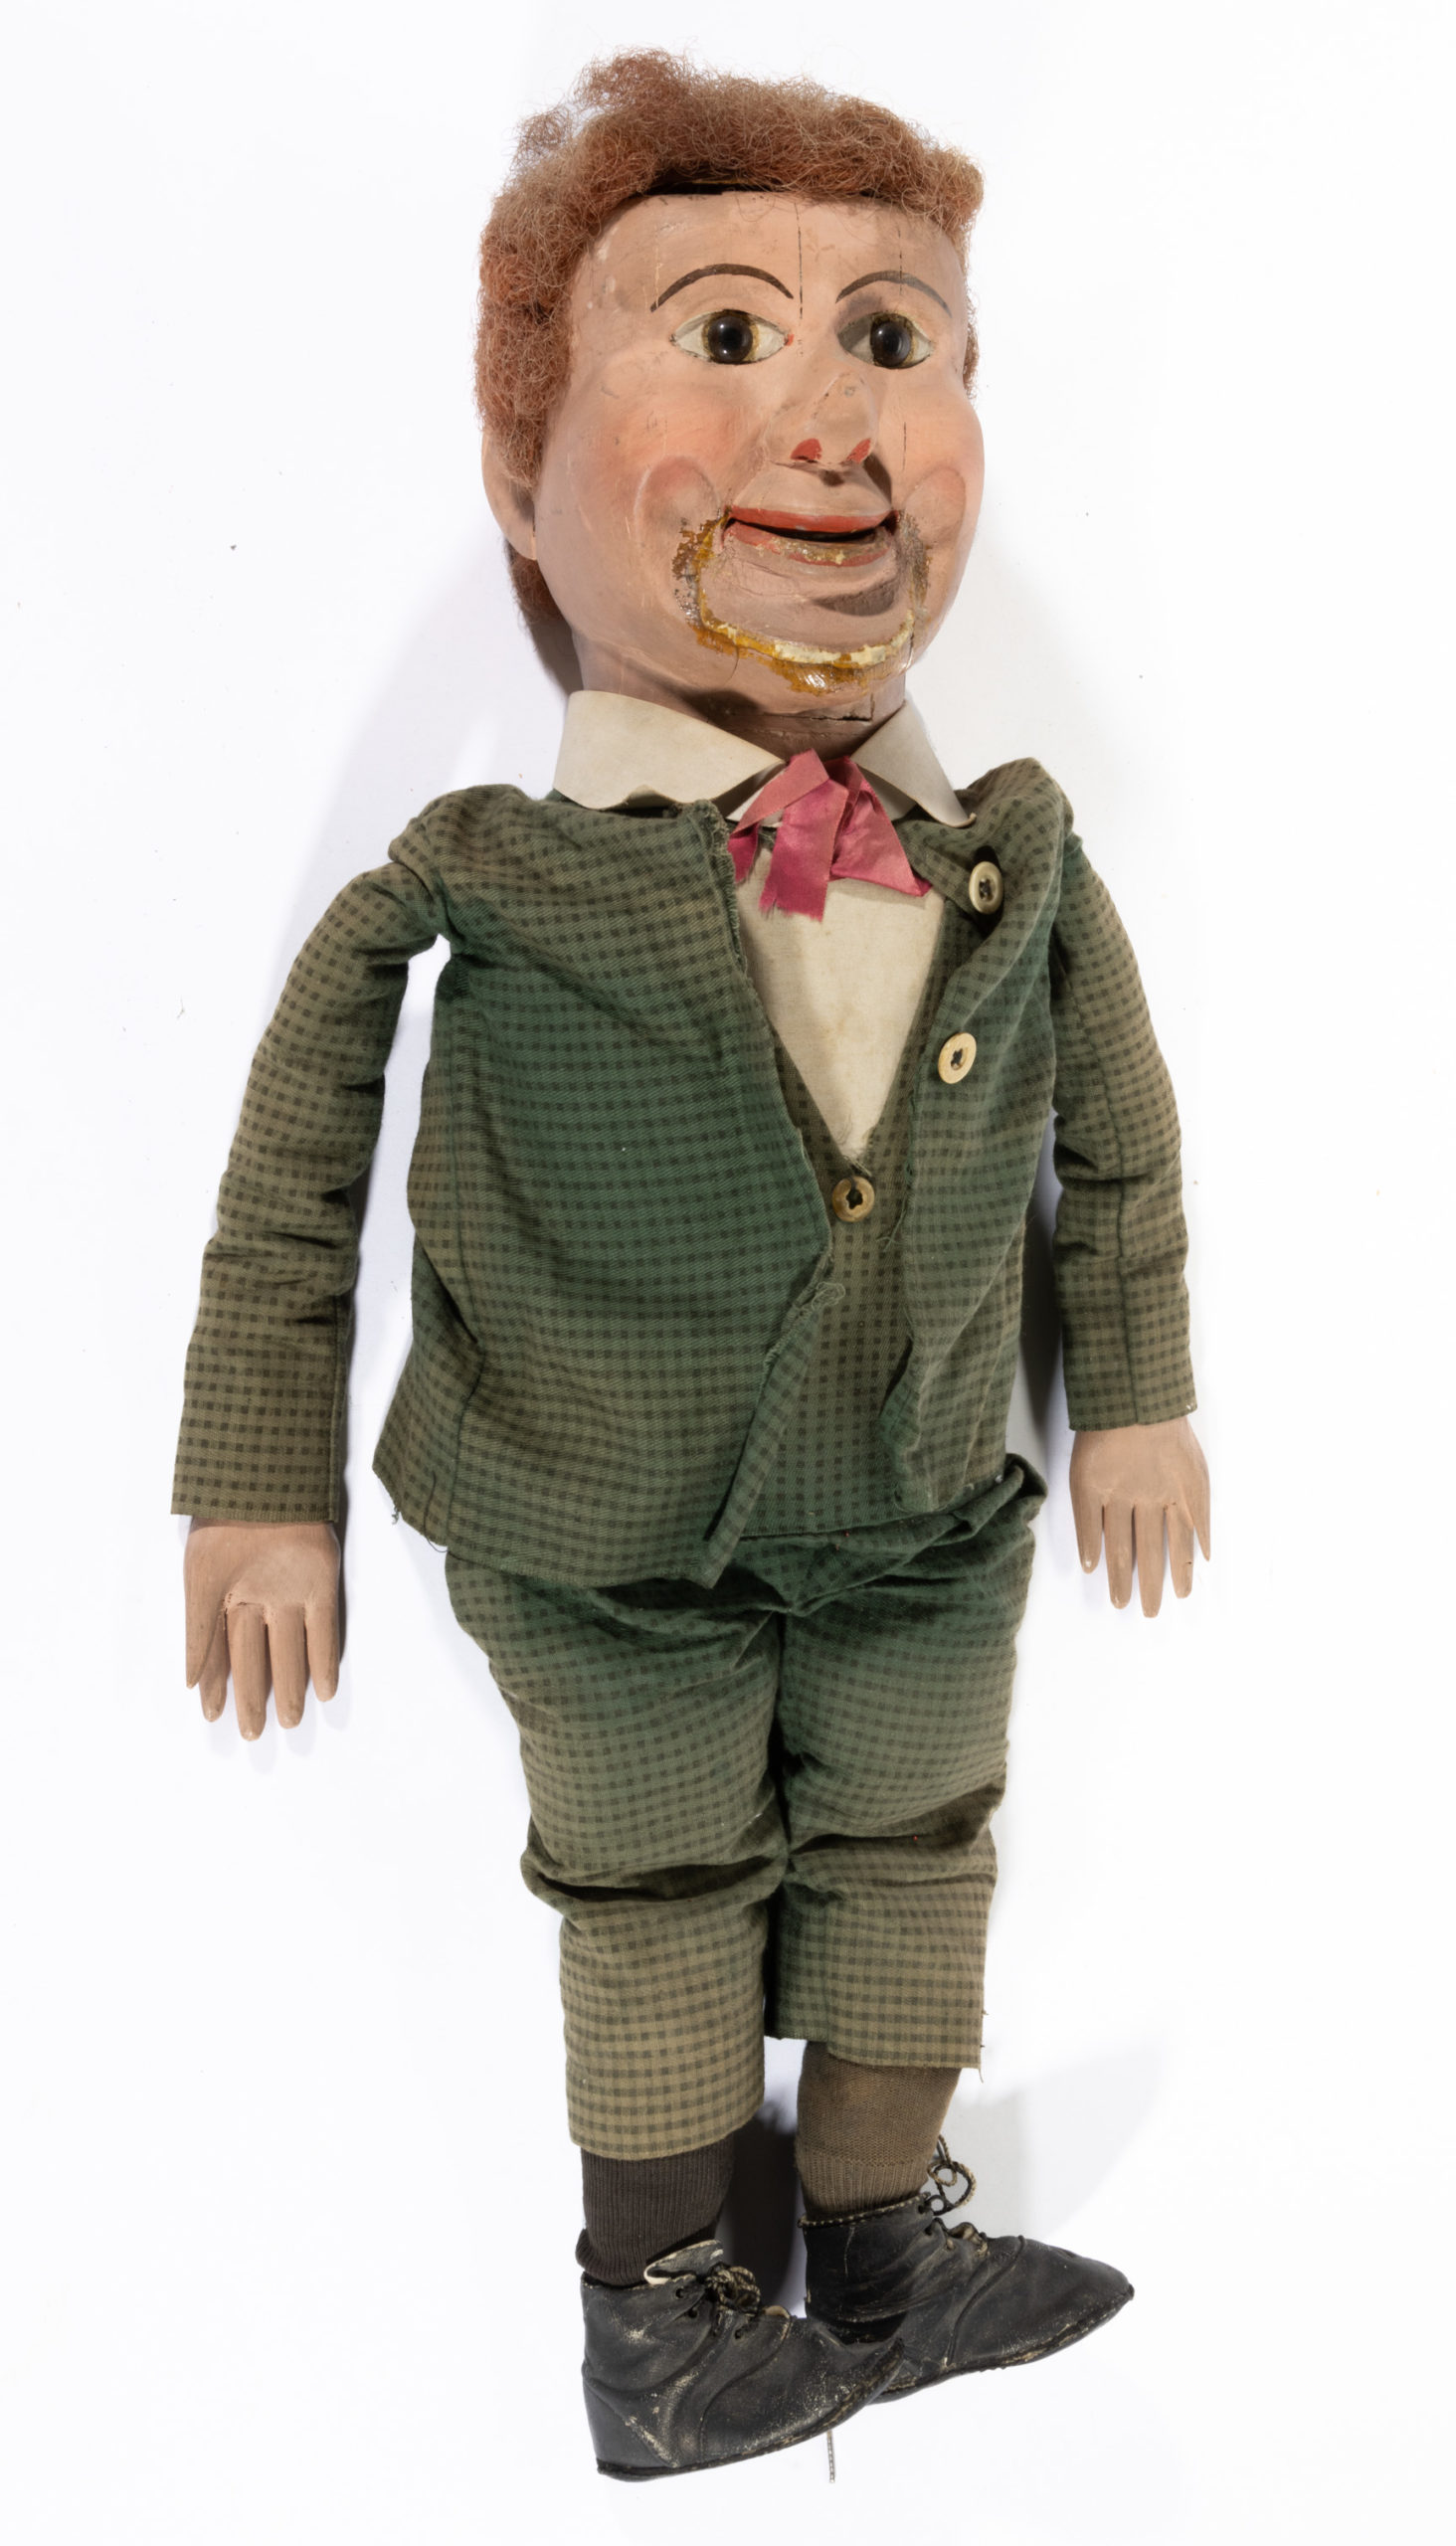 AMERICAN FOLK ART CARVED AND PAINTED VENTRILOQUIST DOLL / DUMMY,